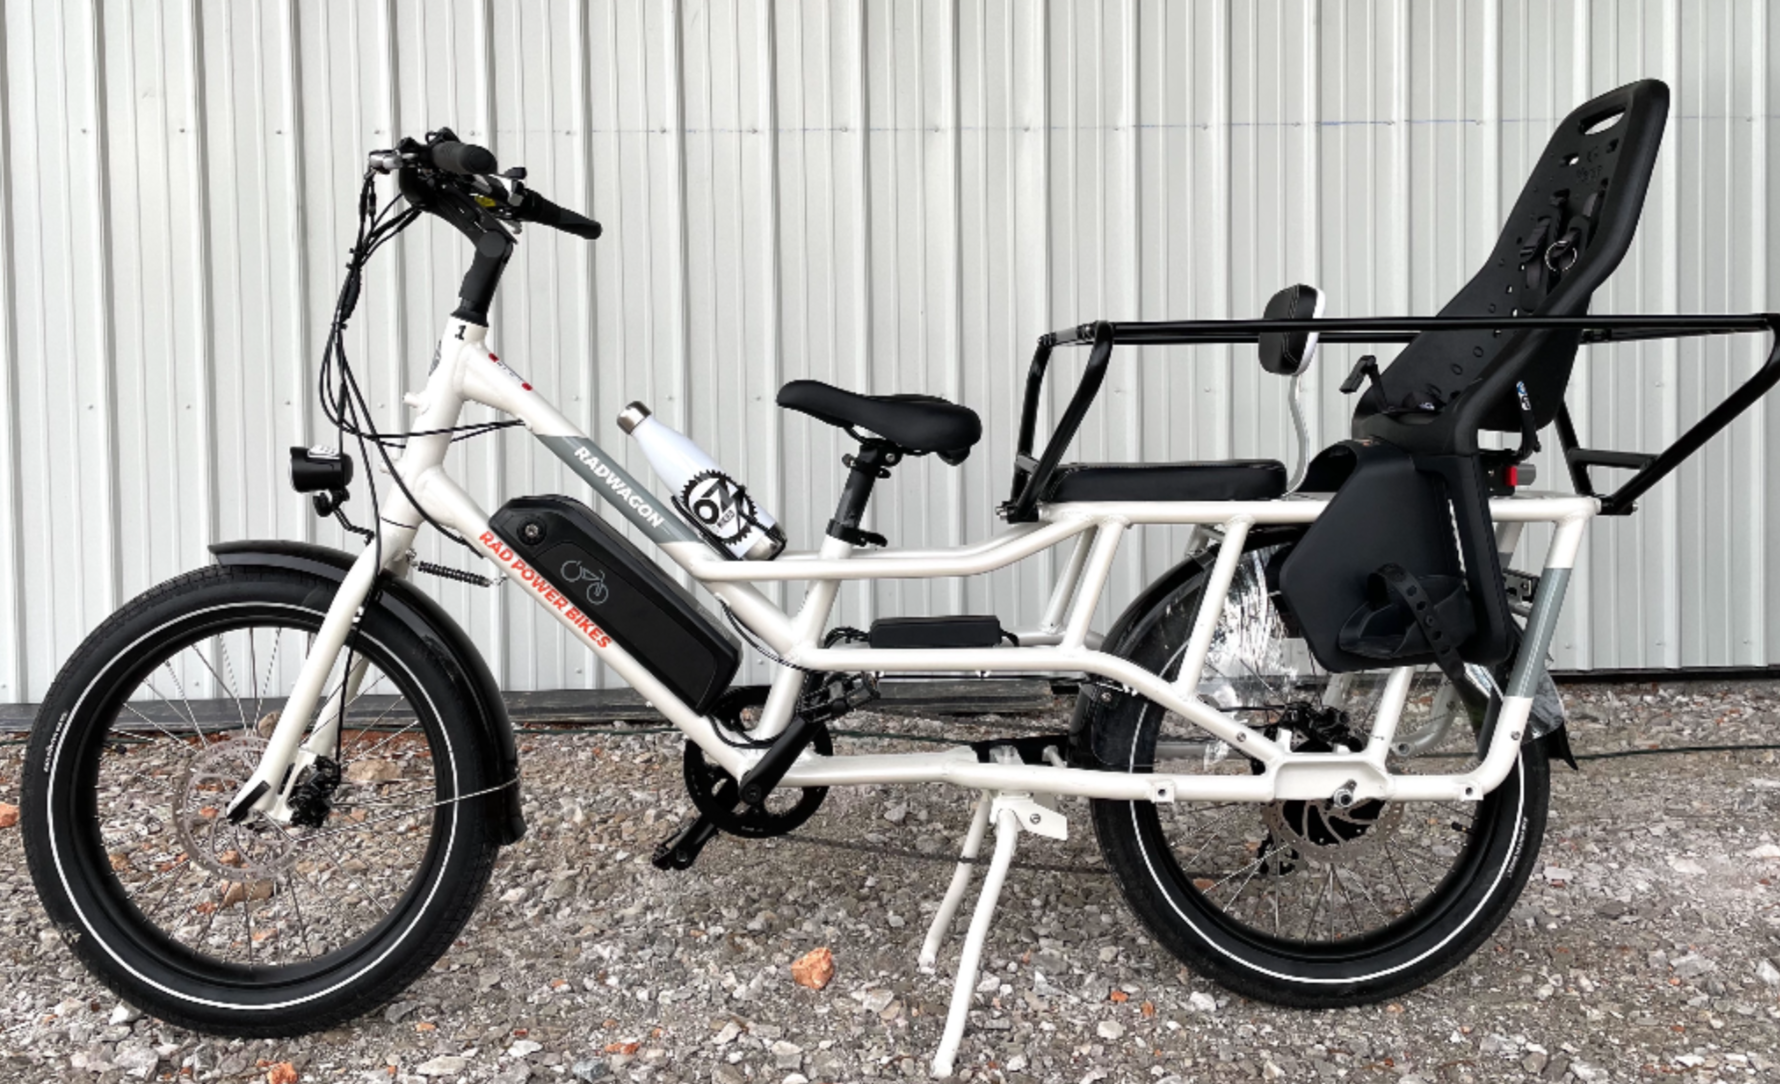 You are currently viewing The Perfect EBike for a Family Outing | RadWagon at OZ EBikes